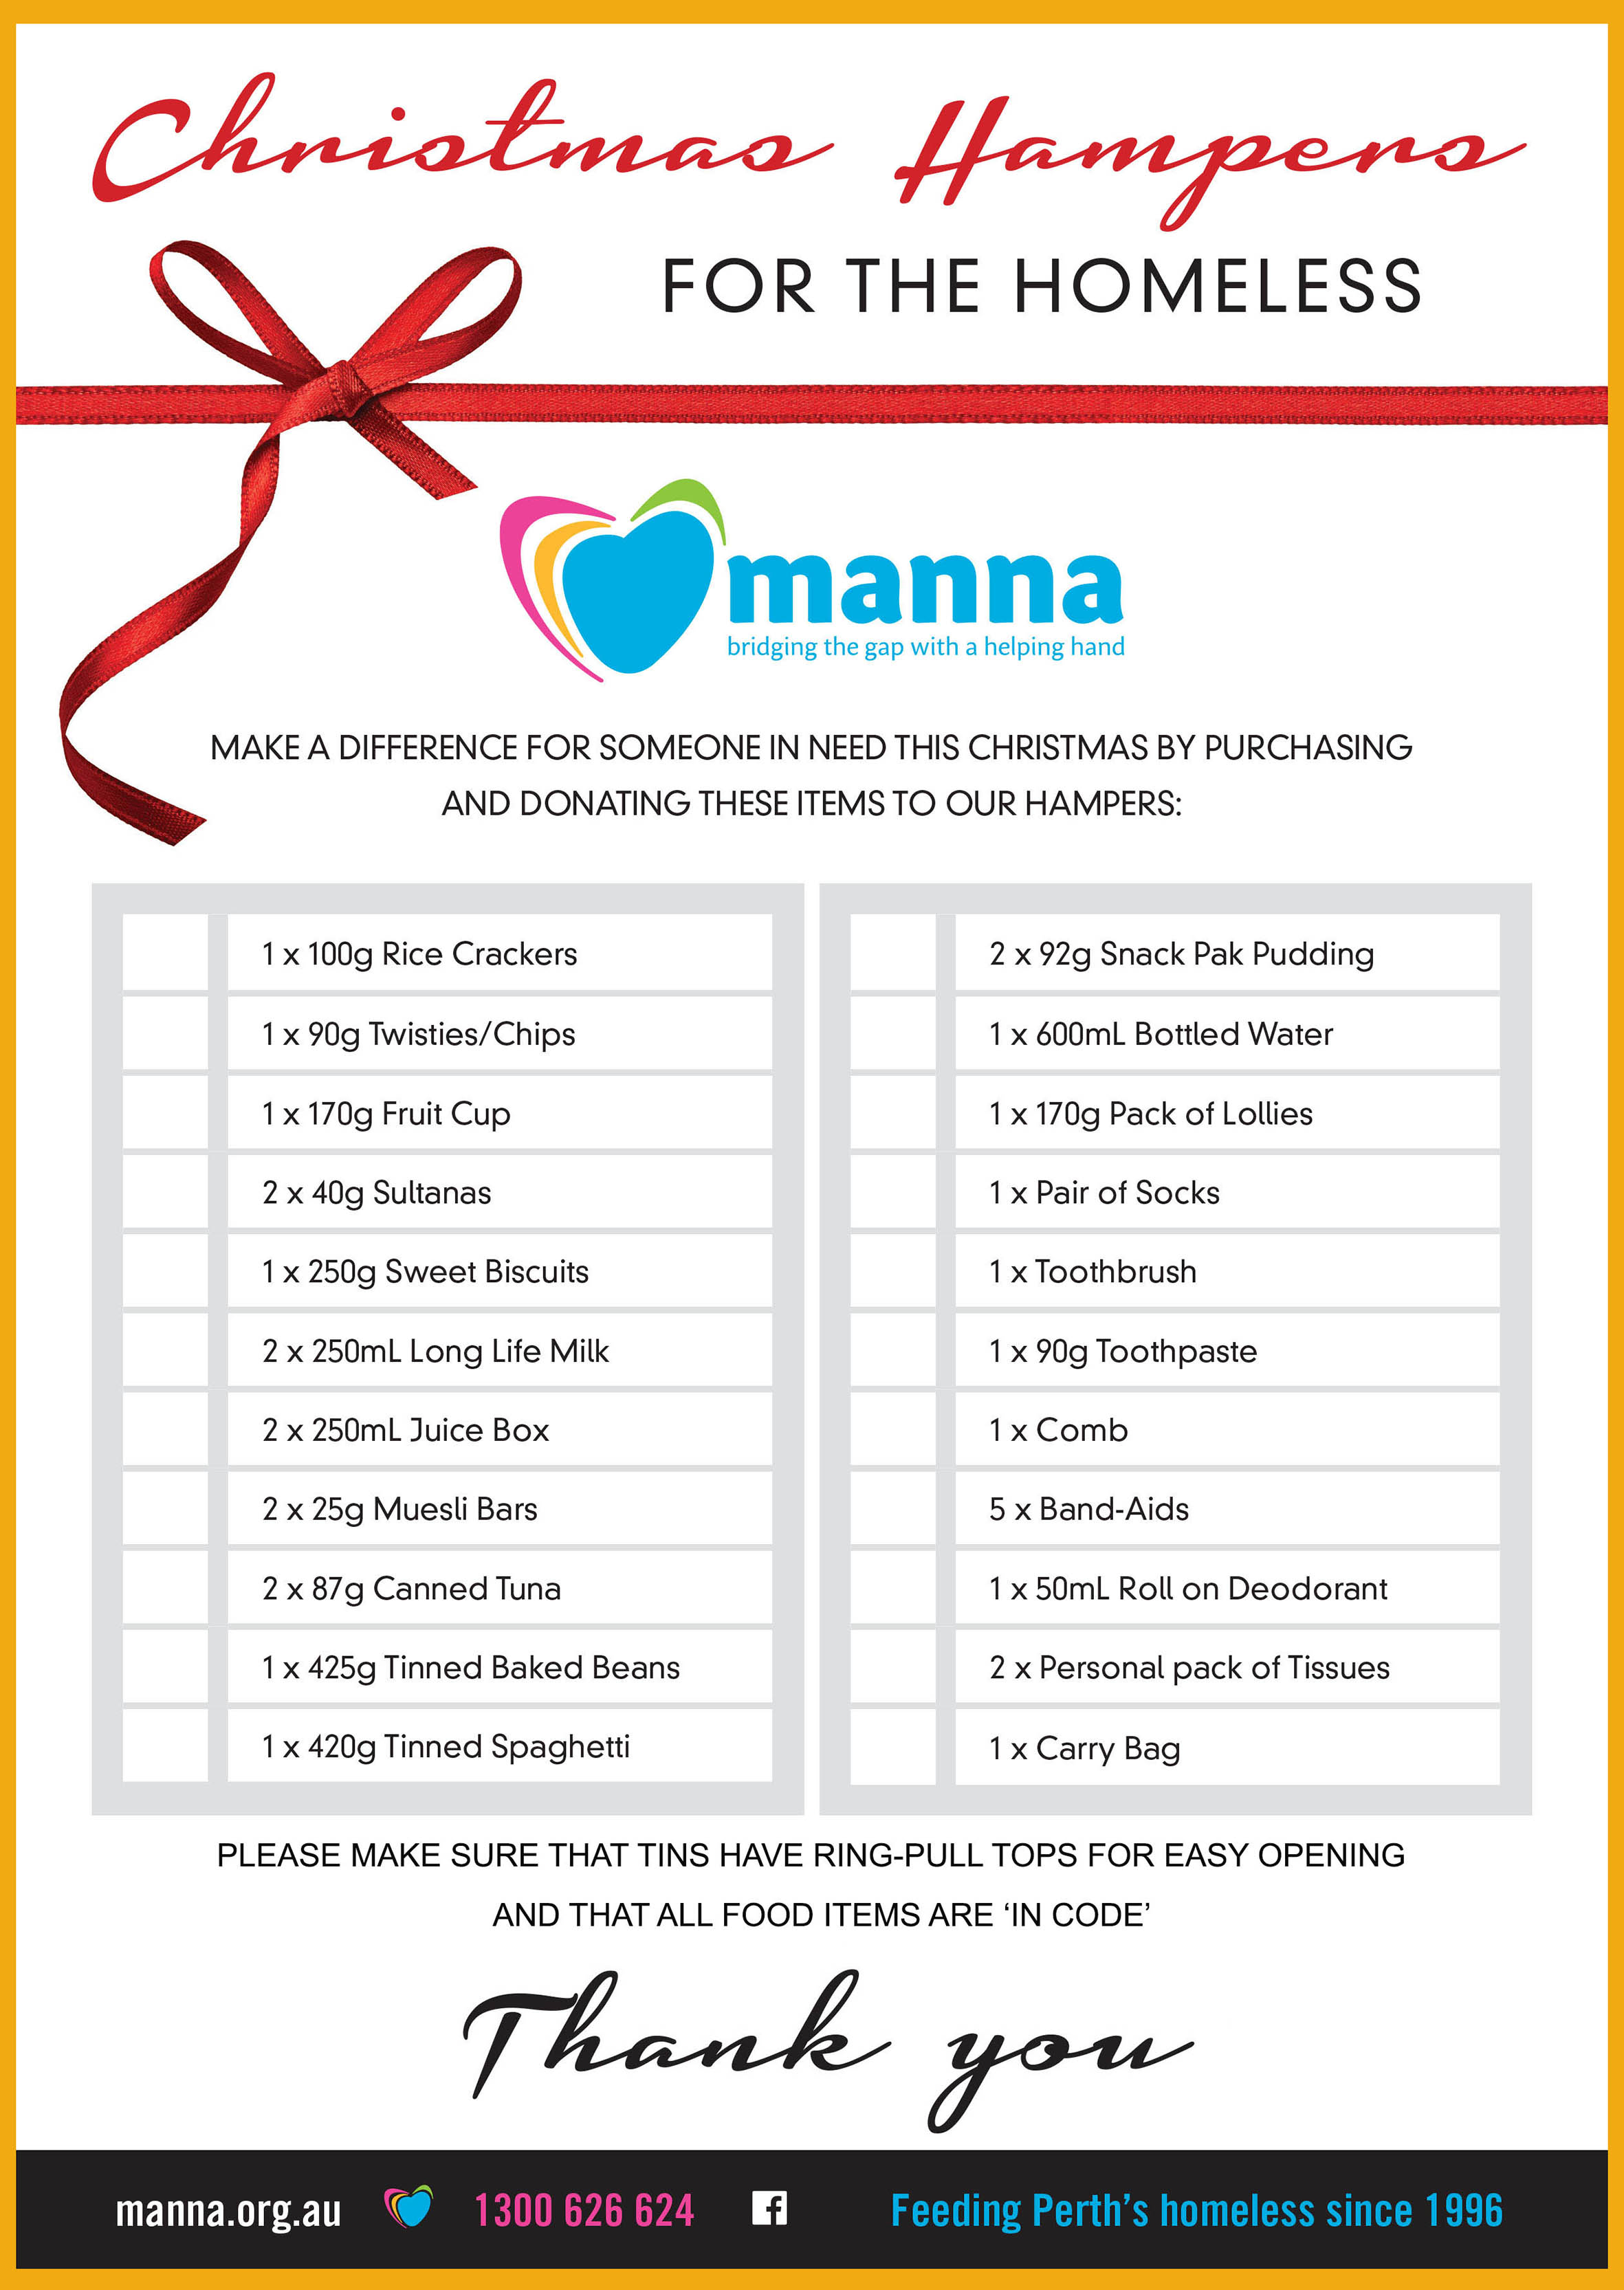 manna_hampers-for-the-homeless-2016